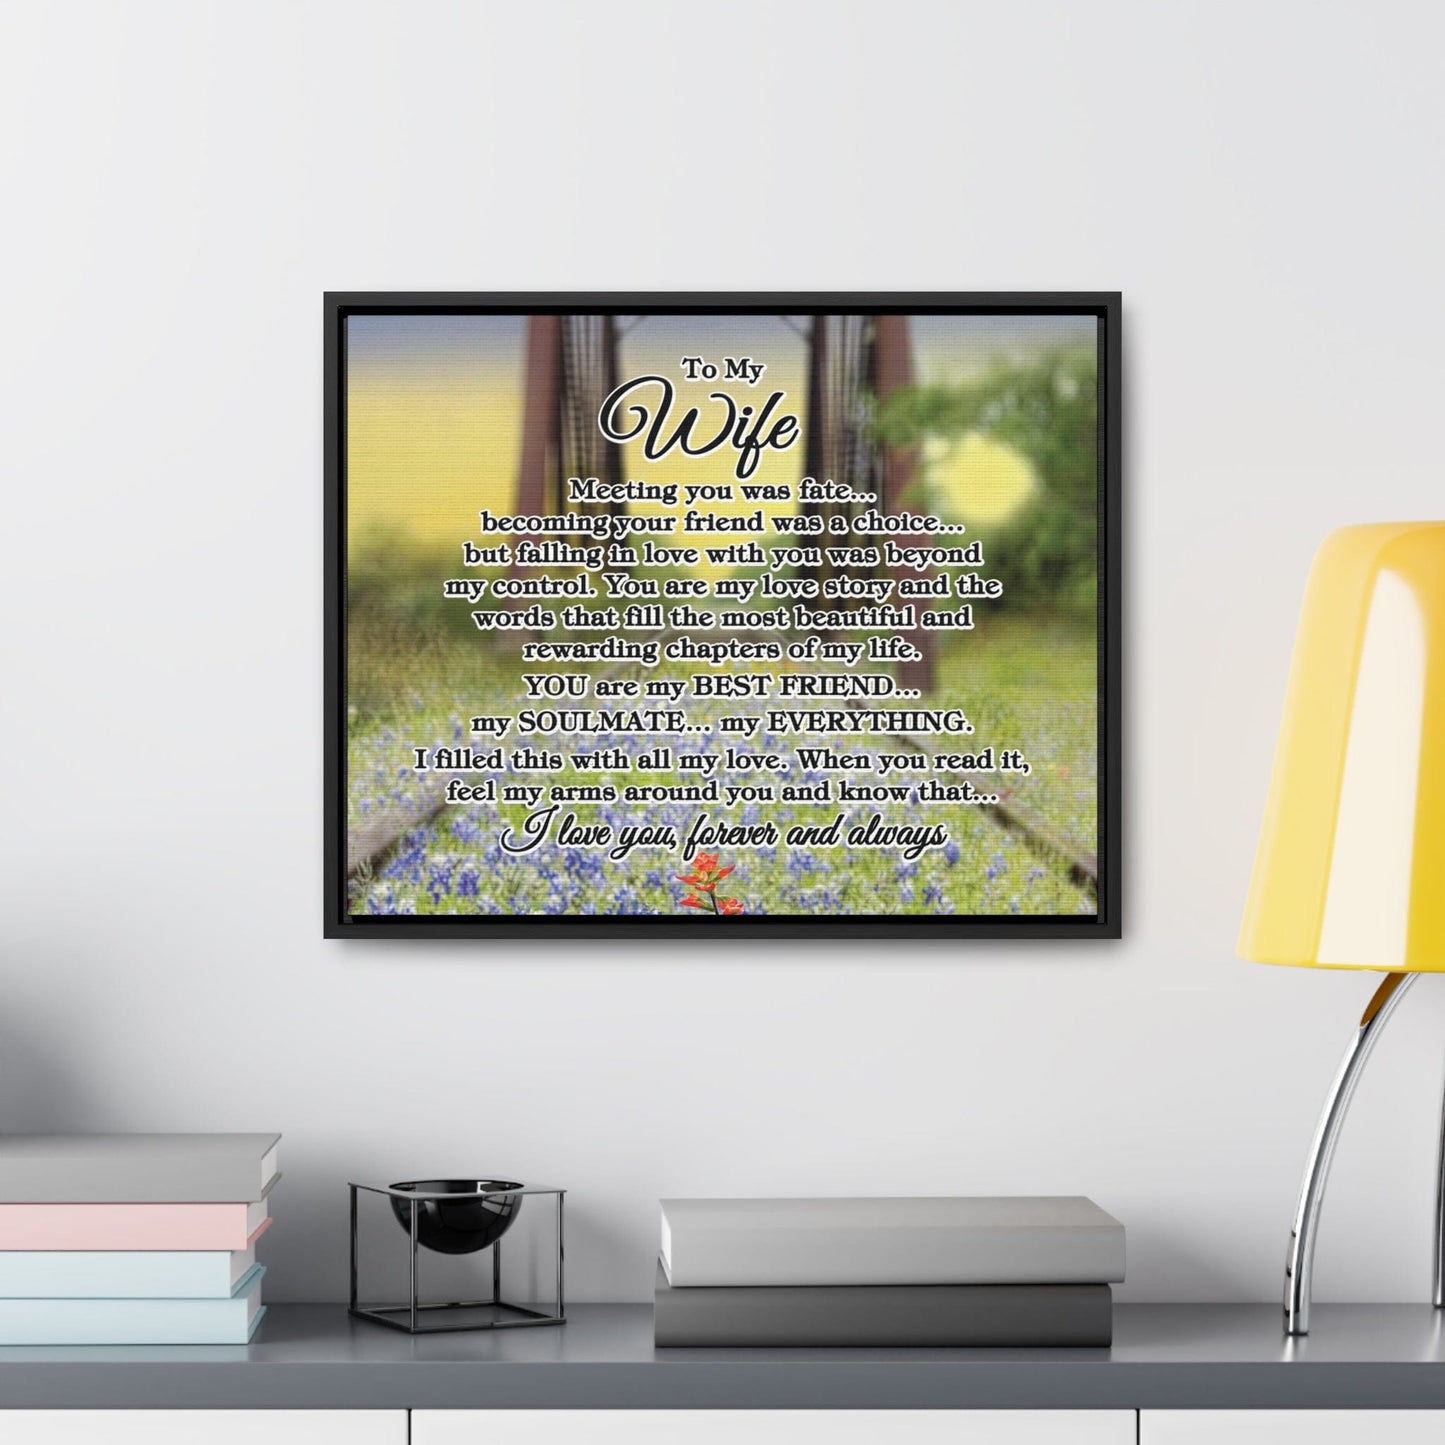 To My Wife "Meeting you was..." Framed Canvas (Bluebonnet Bridge Sunrise)